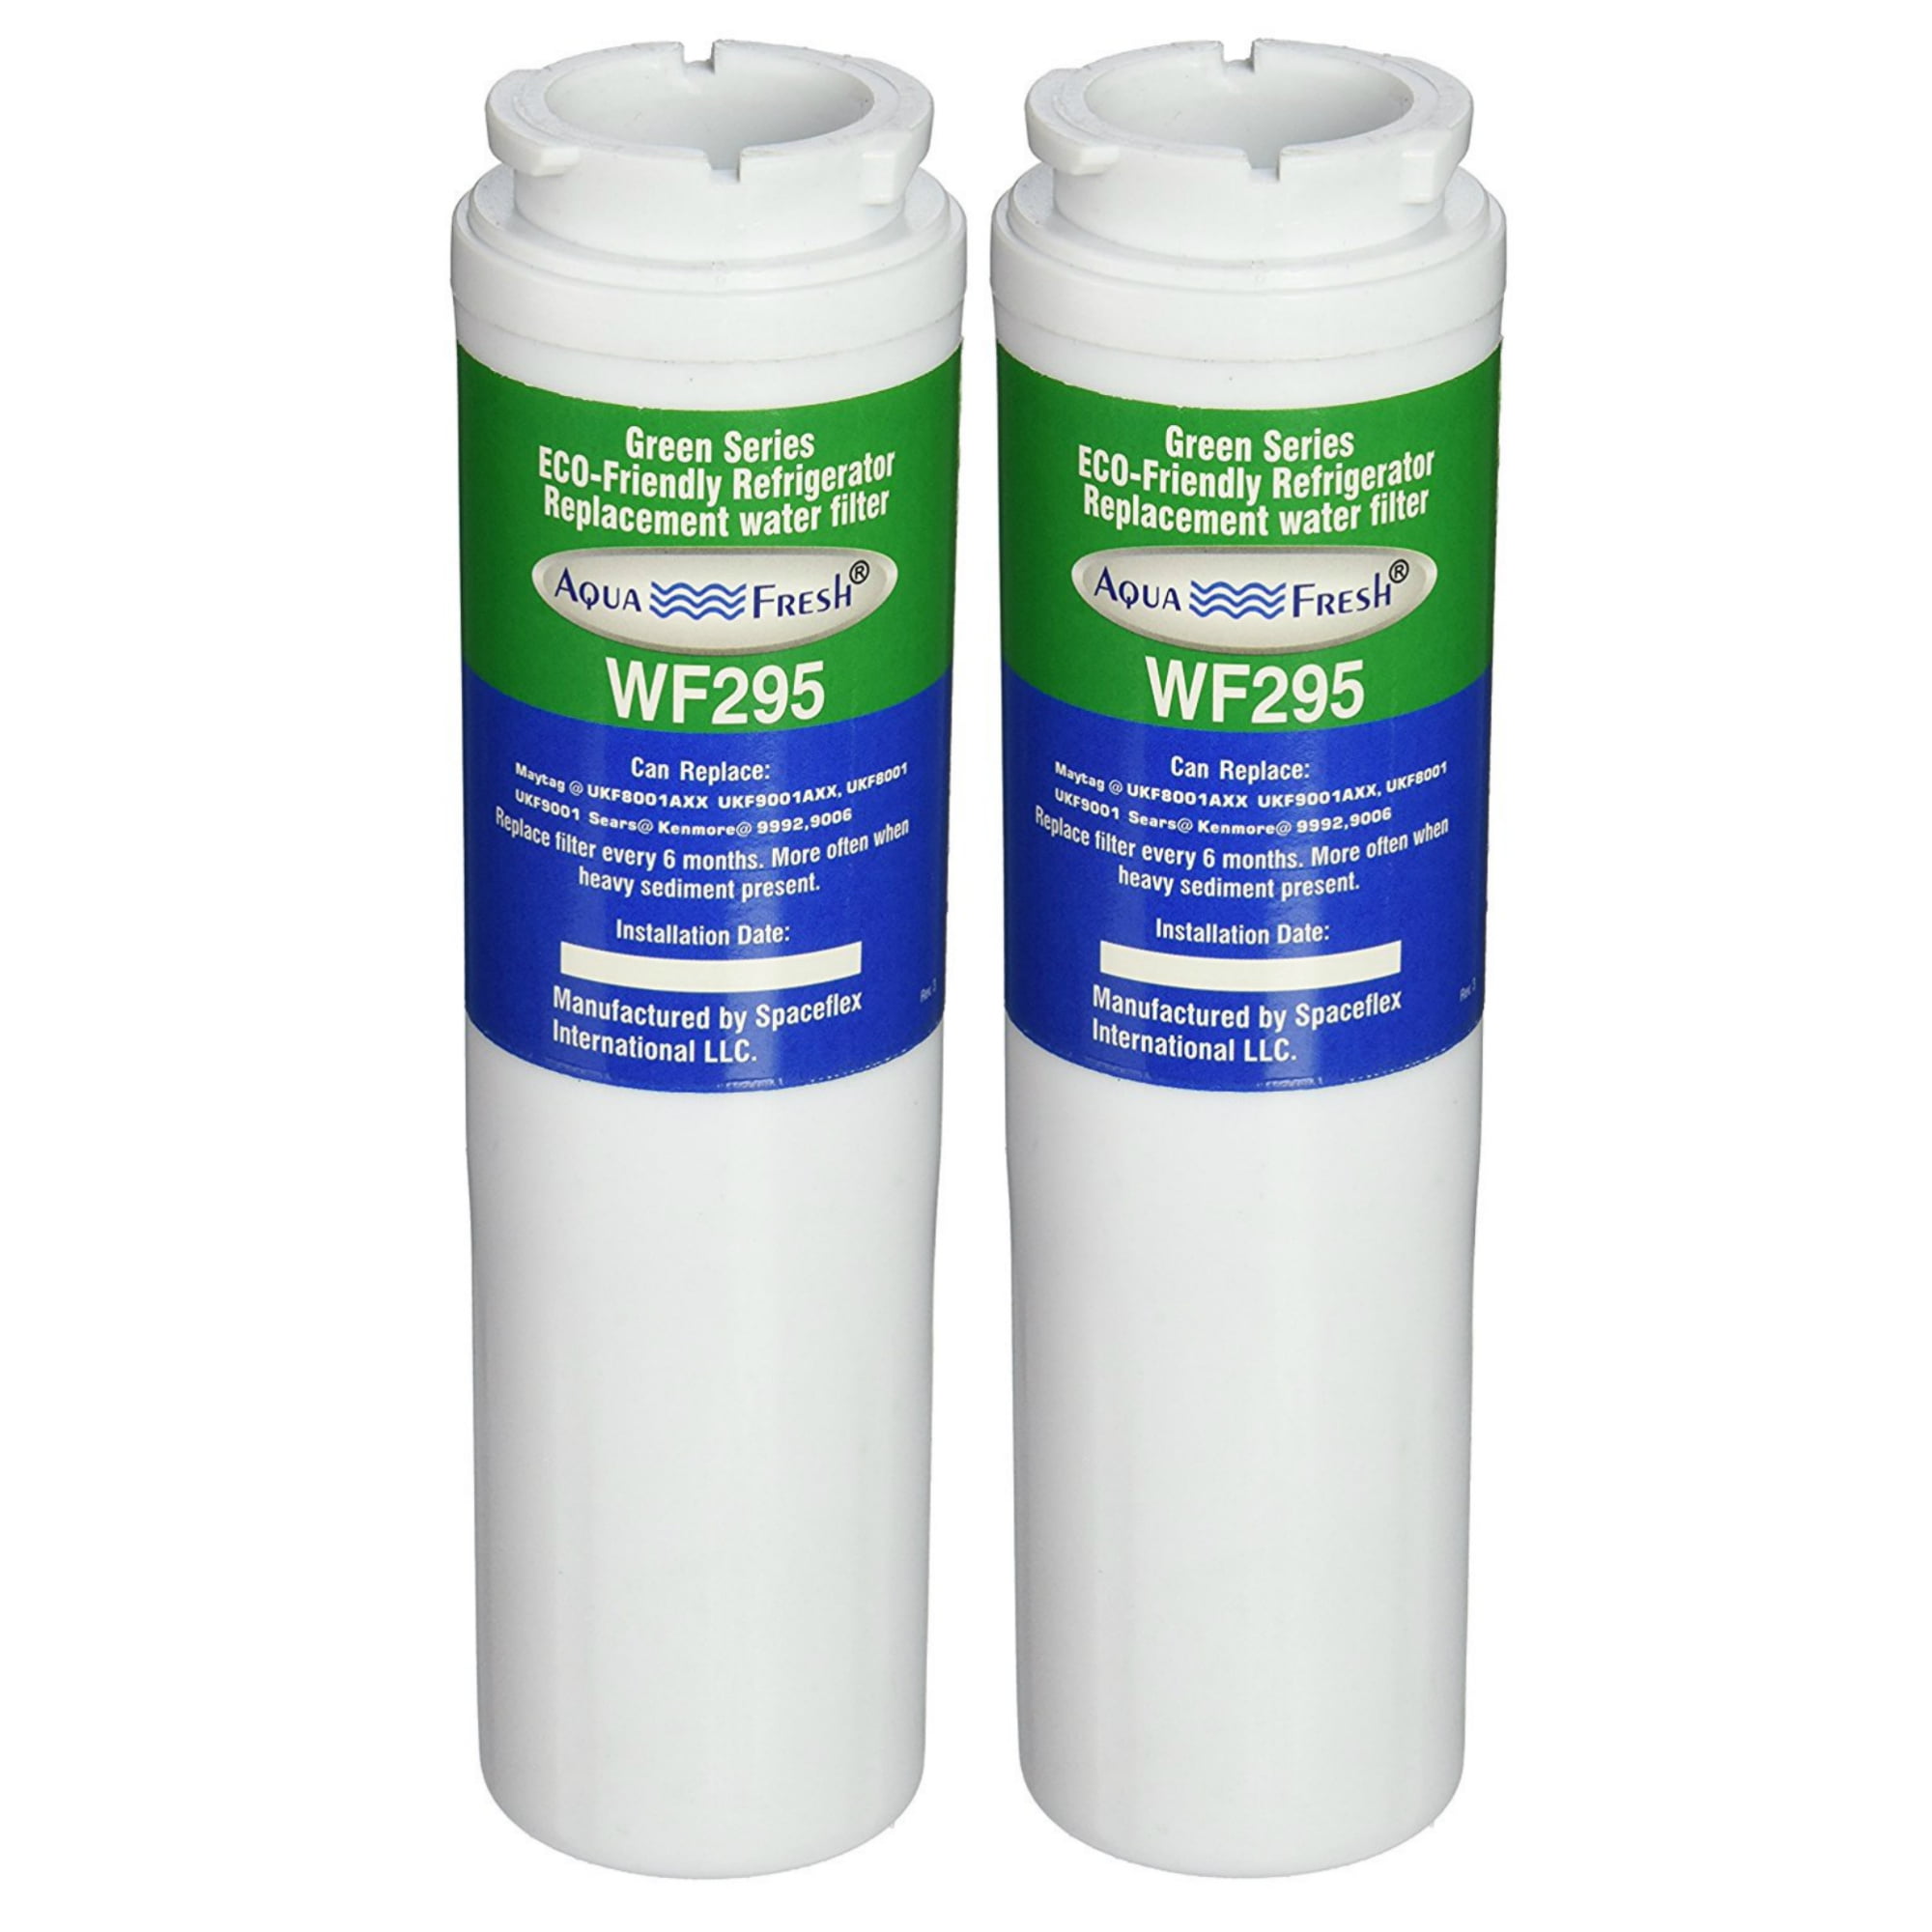 Kenmore 46-9006 Compatible with Maytag UKF8001 EcoAqua EFF-6007A Replacement Filter 2 Pack Everydrop Filter 4 Puriclean II EDR4RXD1 Whirlpool 4396395 Viking RWFFR Refrigerator Water Filter 